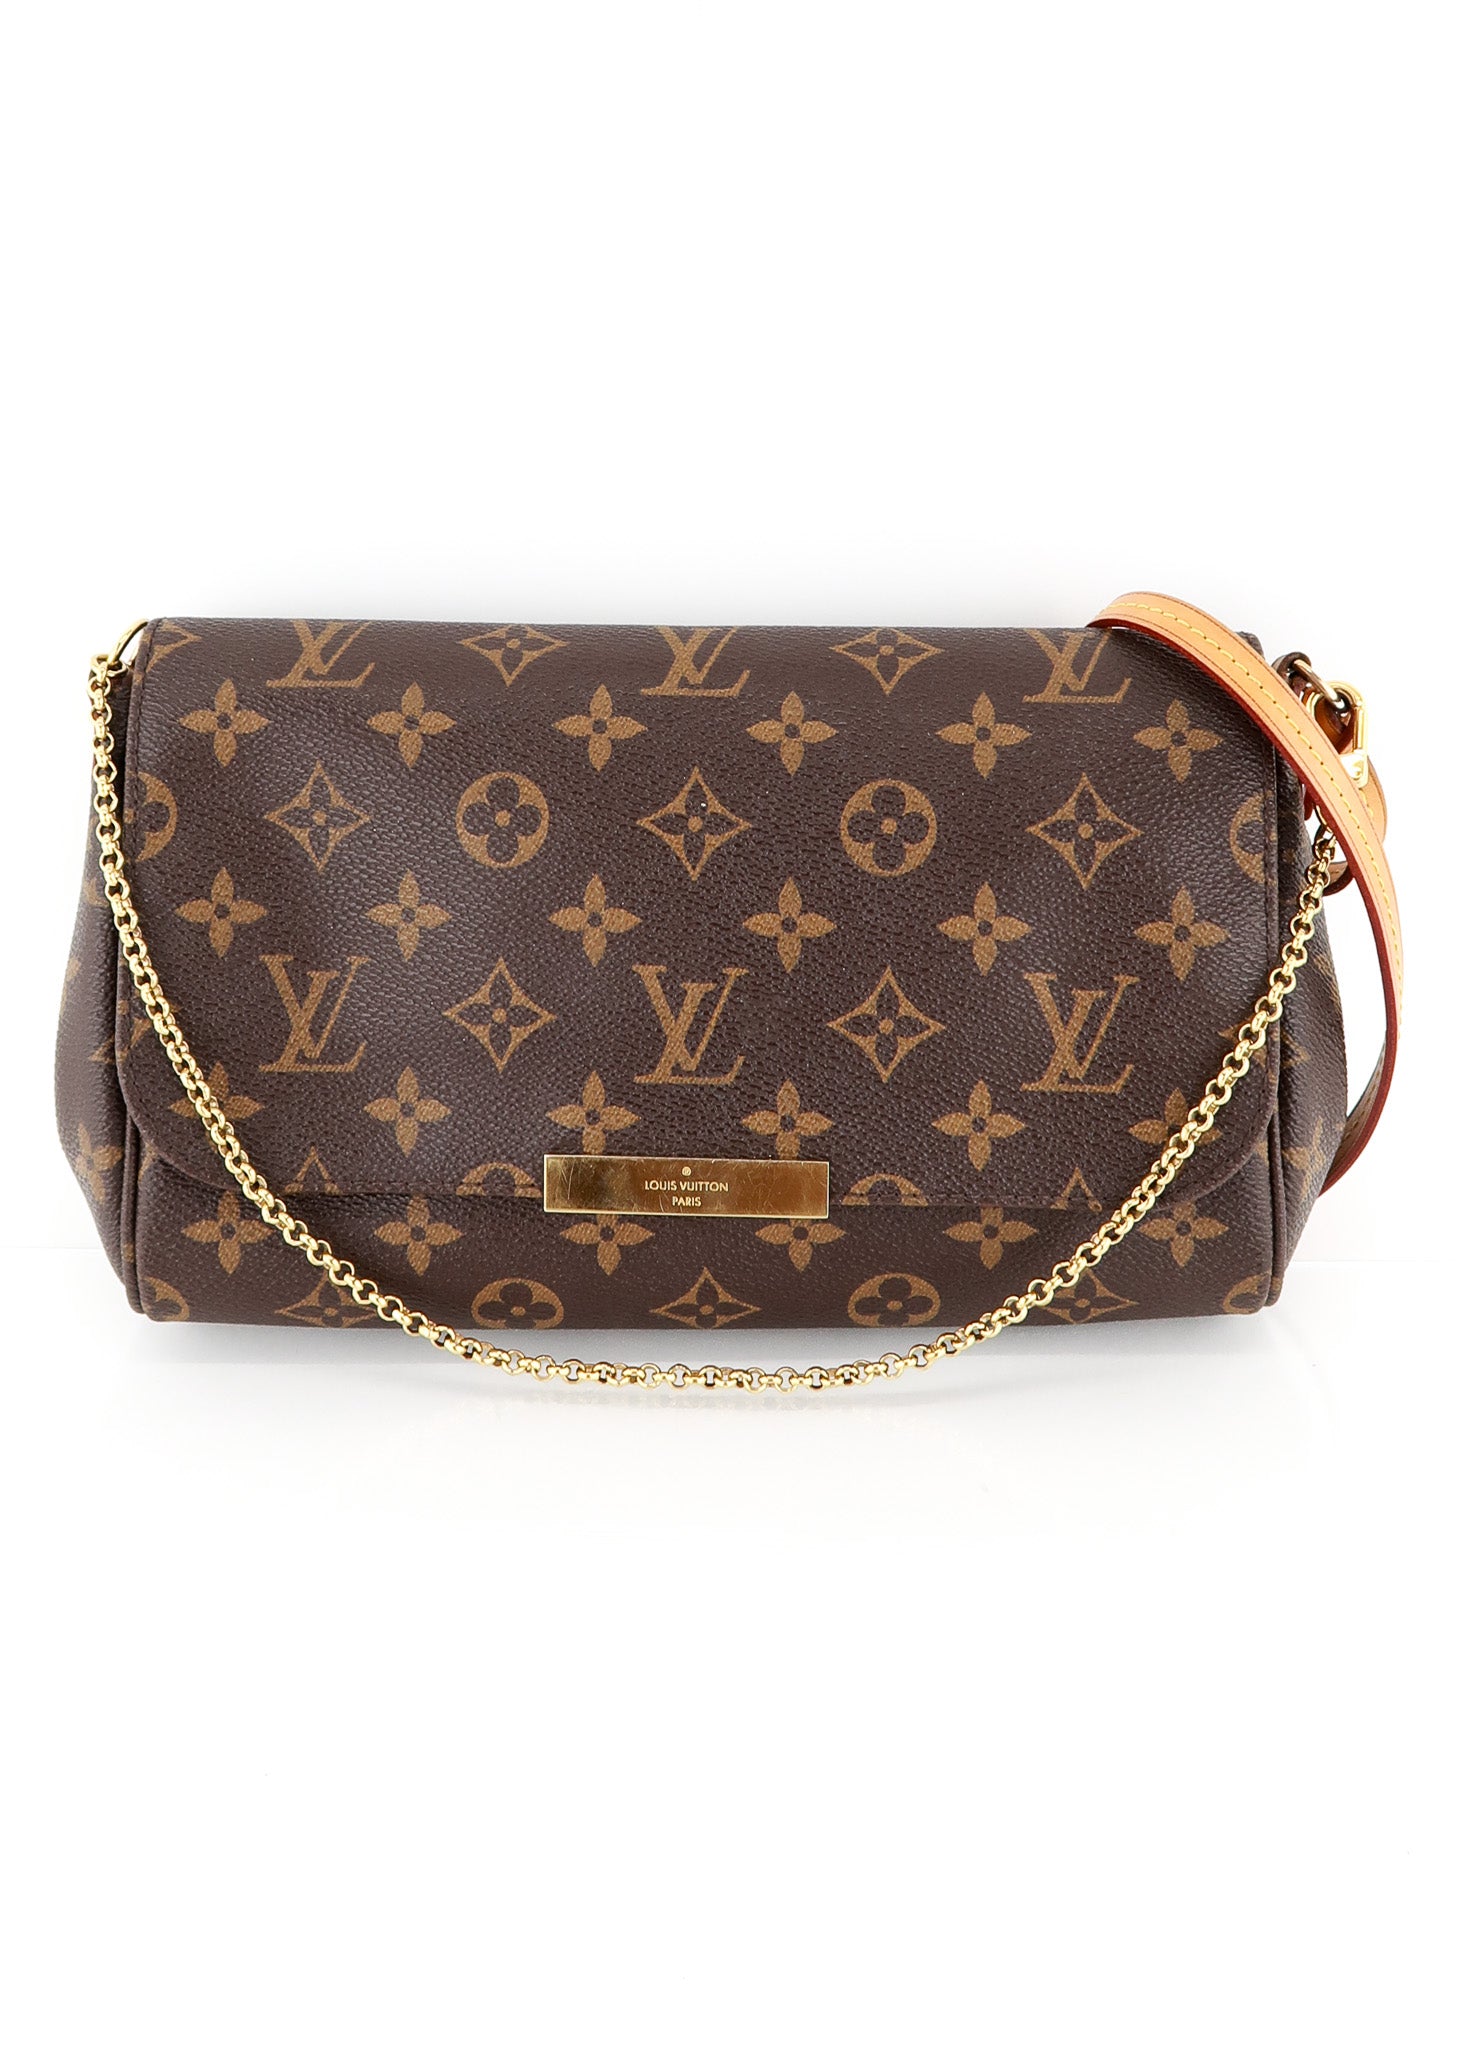 Louis Vuitton favorite MM what can it fit??? 